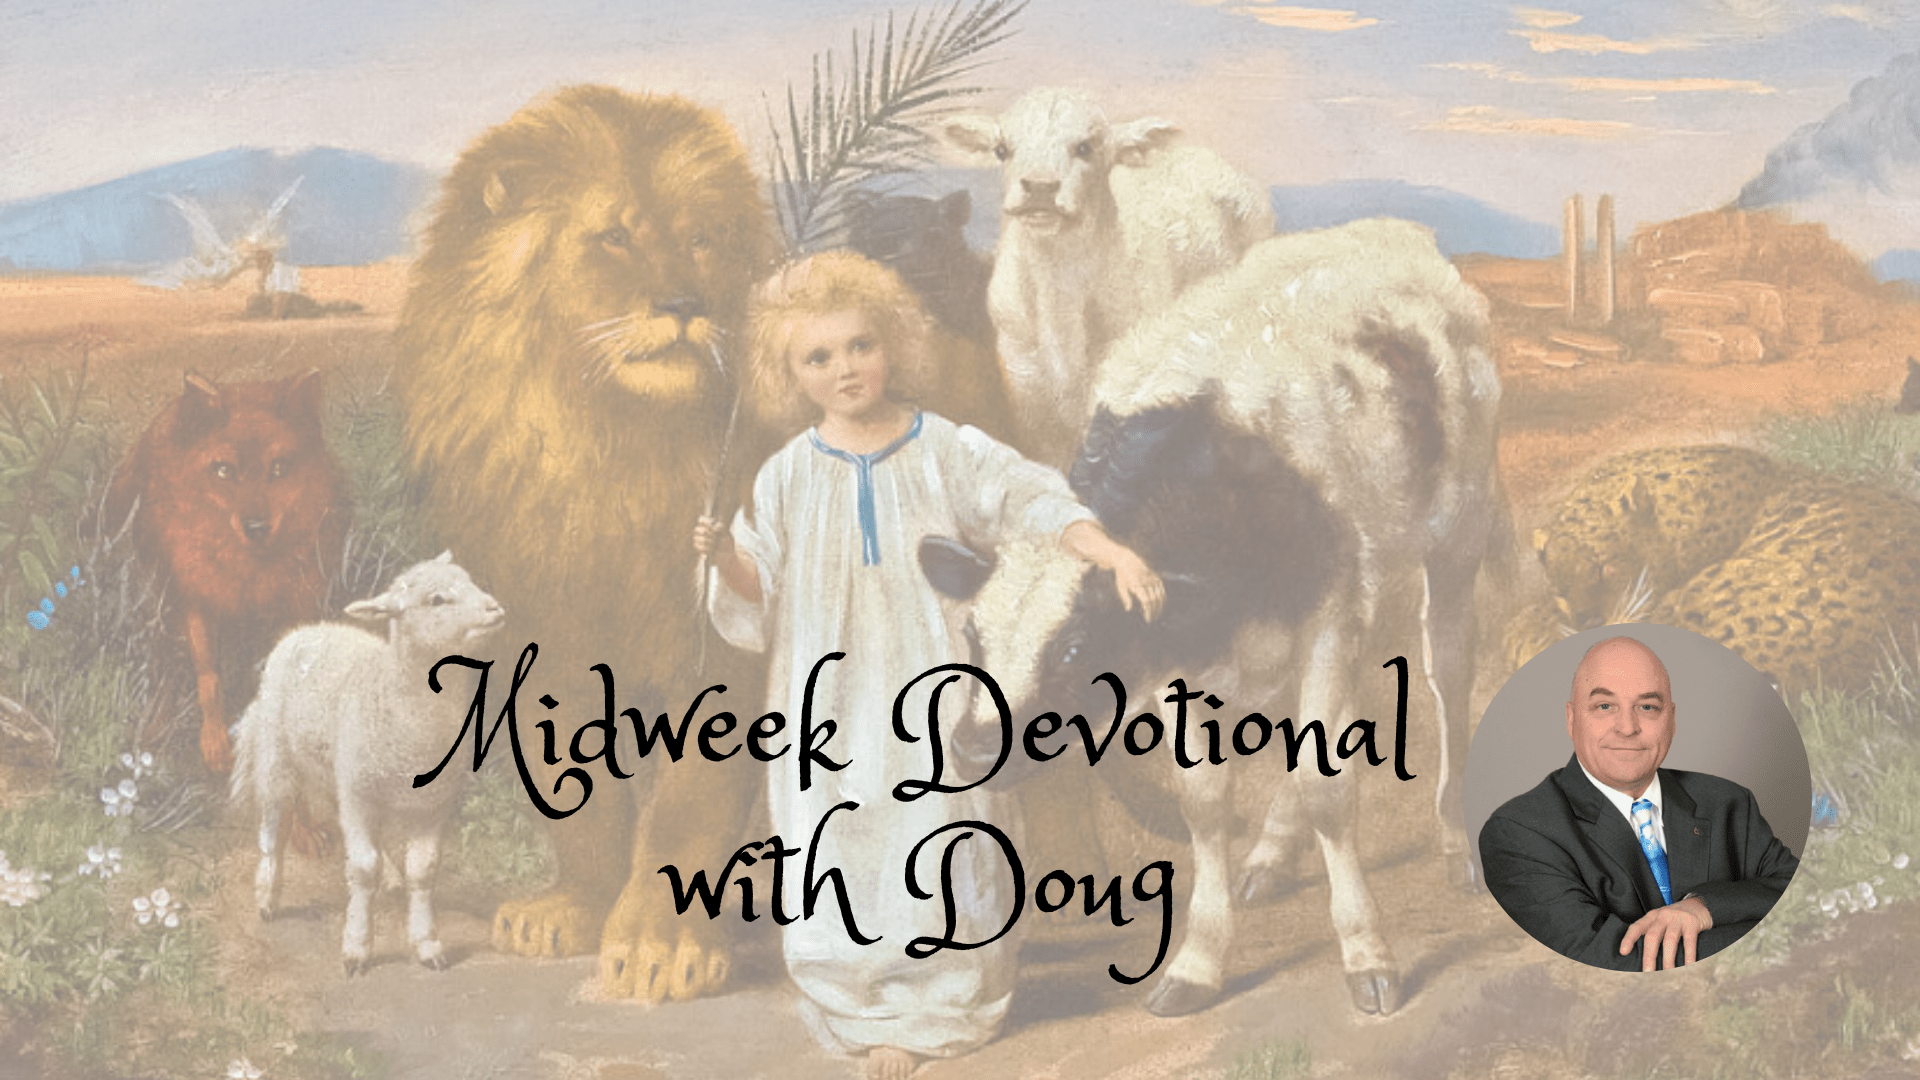 Midweek Devotional with Doug for fifth week of June